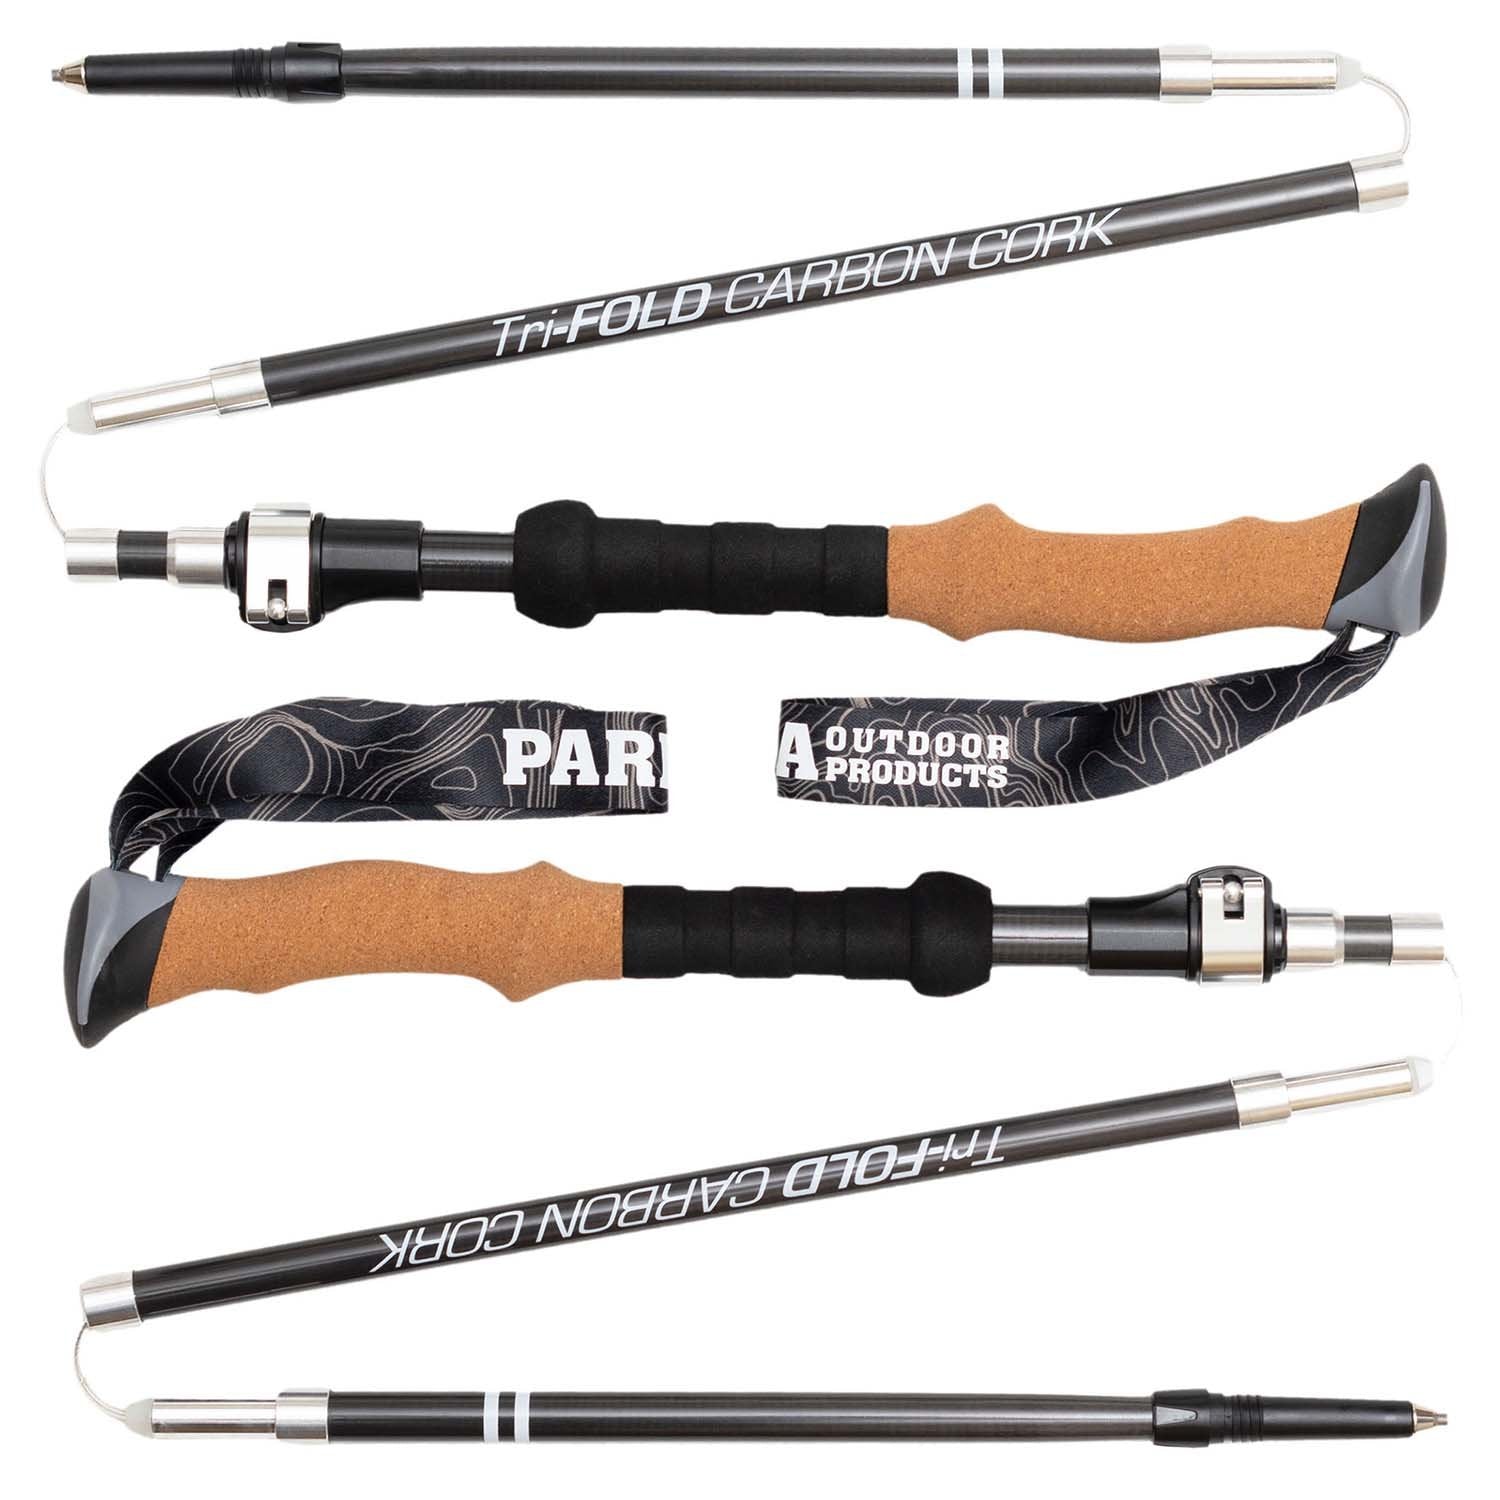 Details about   Collapsible Trekking Poles w/ Cork Grips & All Terrain Accessories 